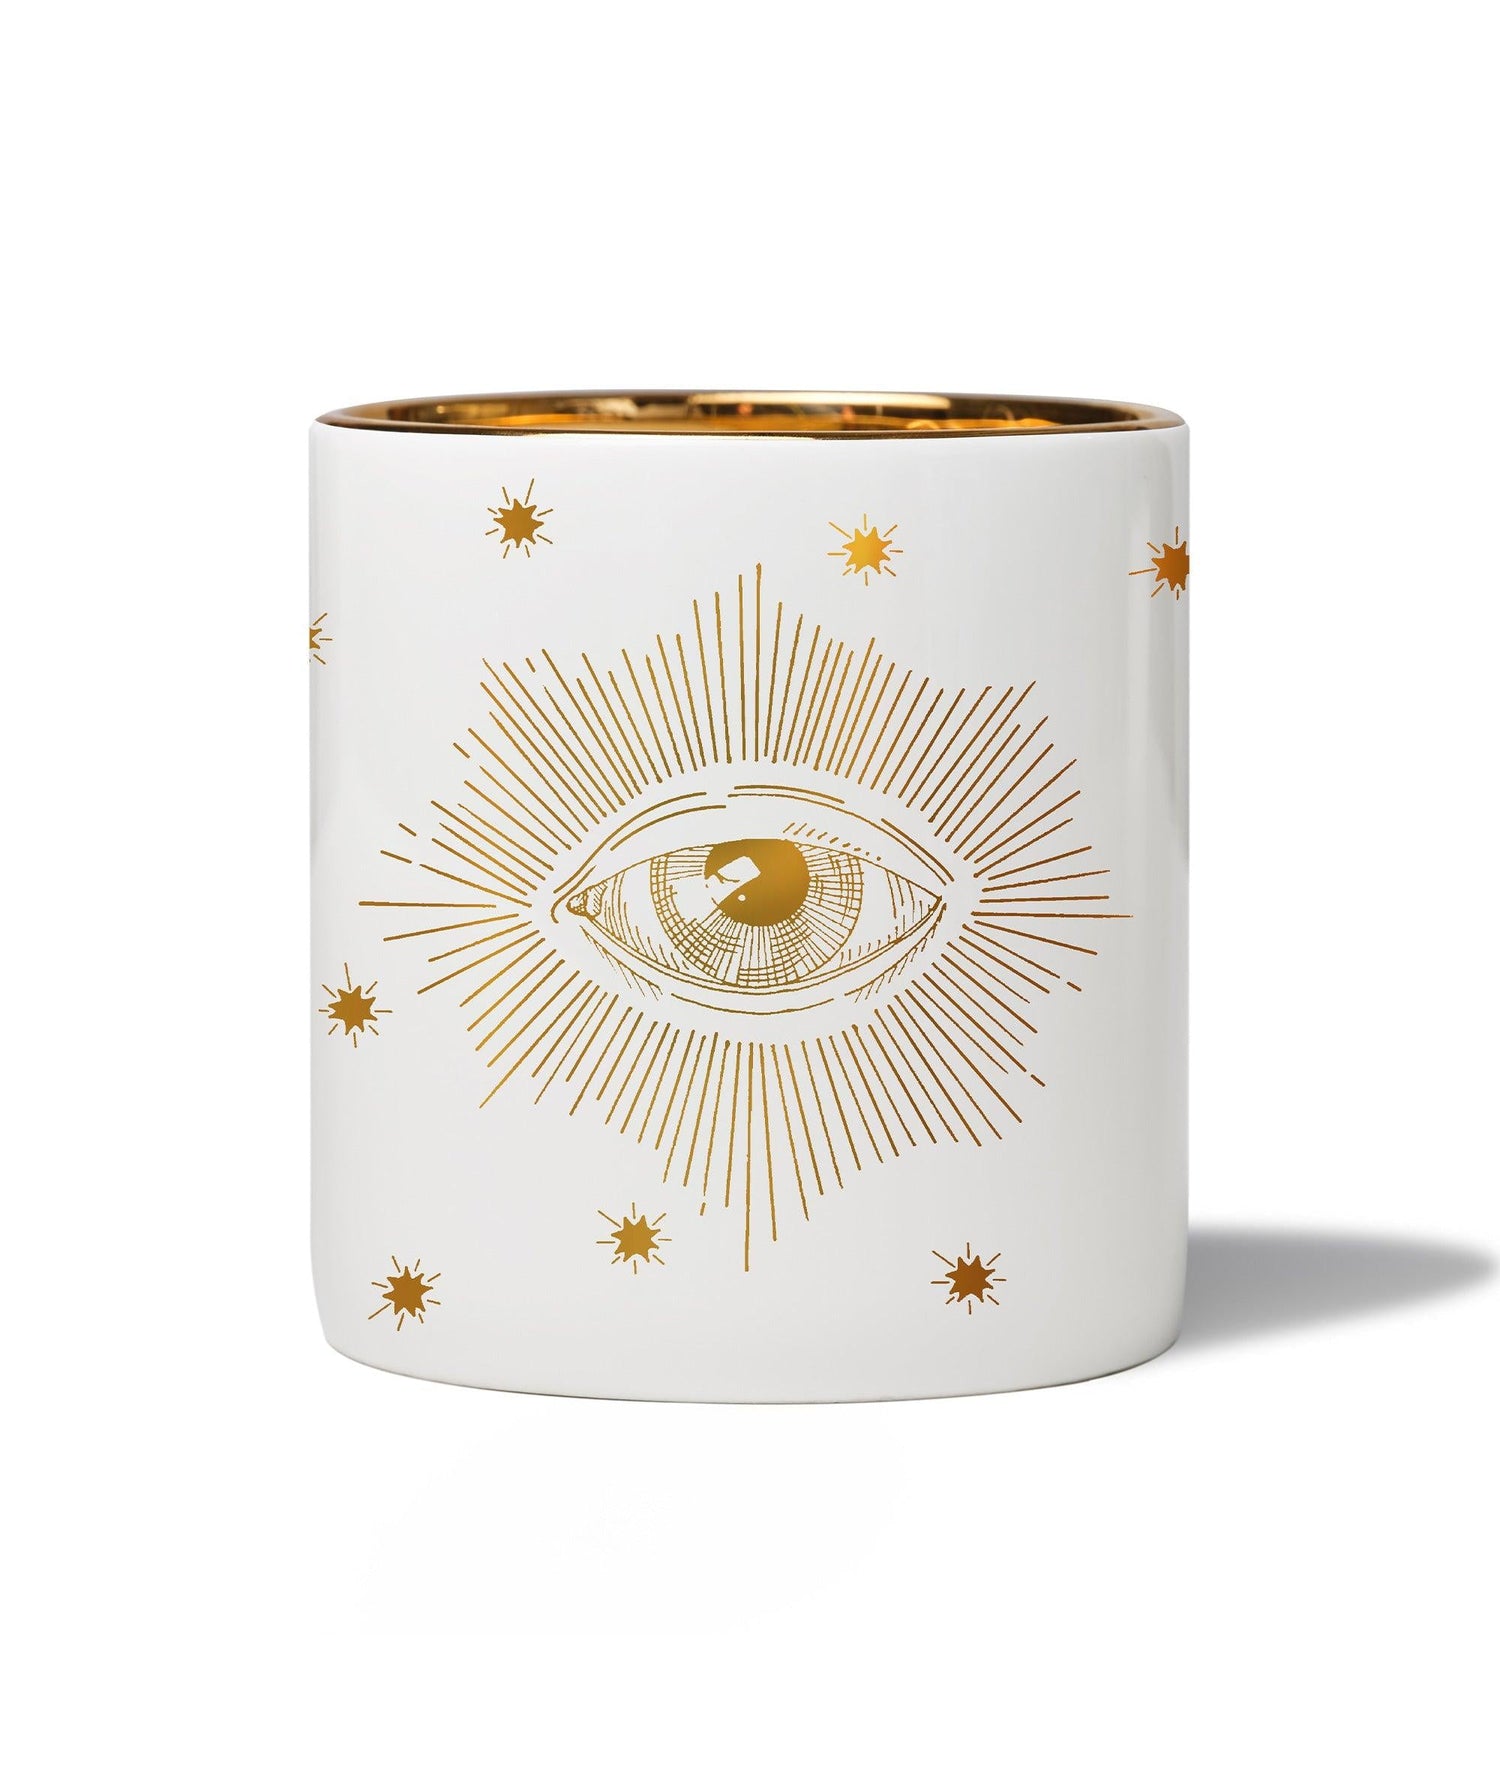 'A Watchful Eye' Perfumed Candle - Wing of Wisdom